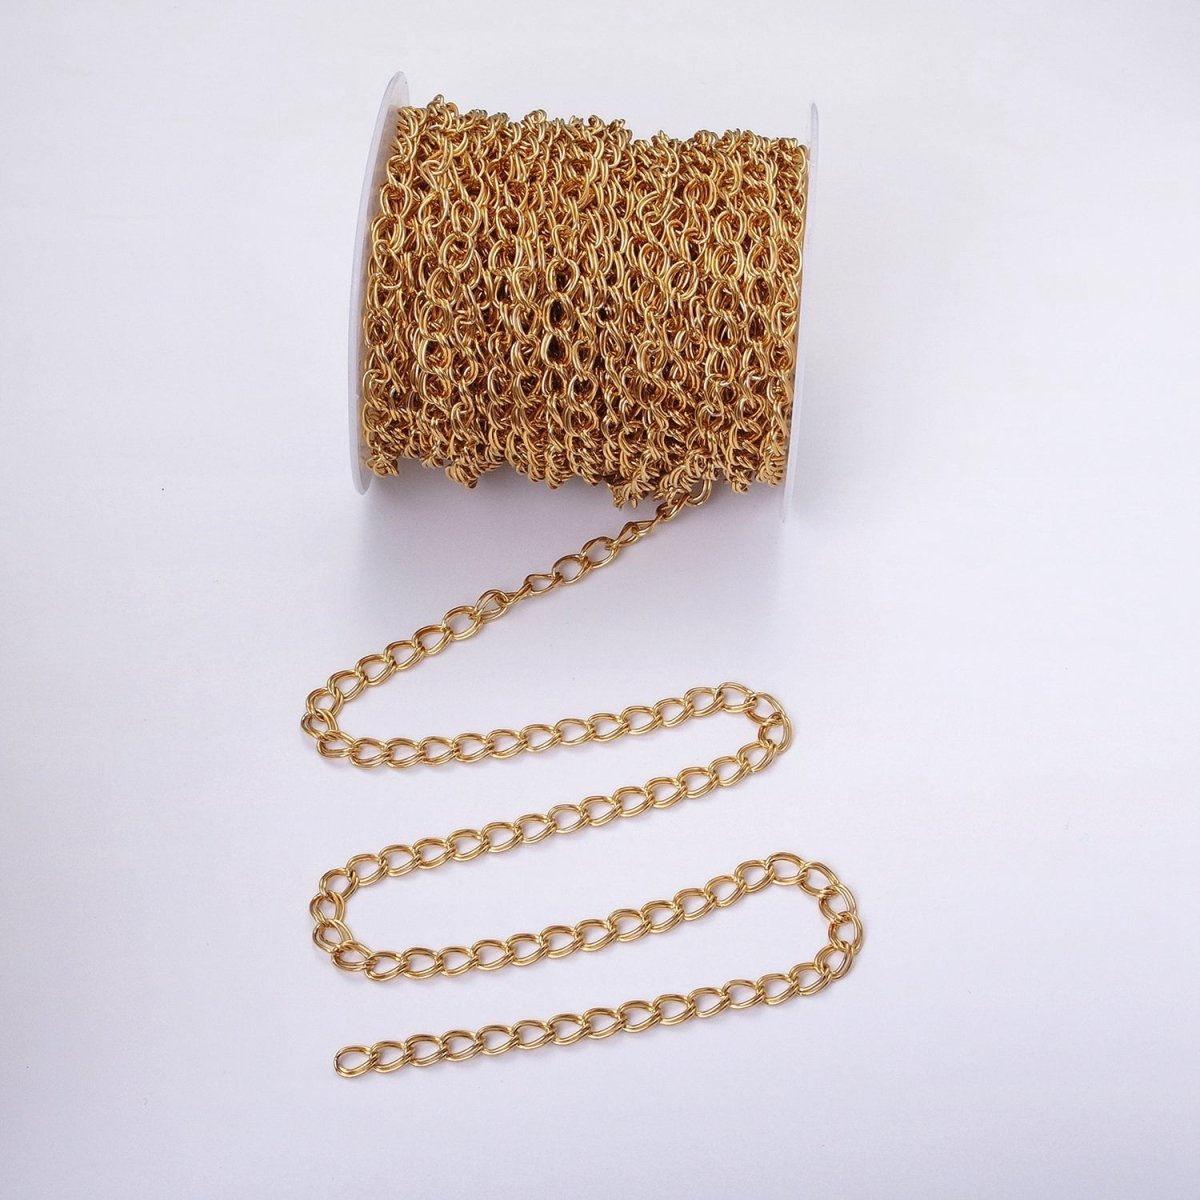 24K Gold Filled Double Cable Chain 6.1 mm Oval Cable Link Unfinished Chain by Yard | ROLL-1297 ROLL-1298 Clearance Pricing - DLUXCA